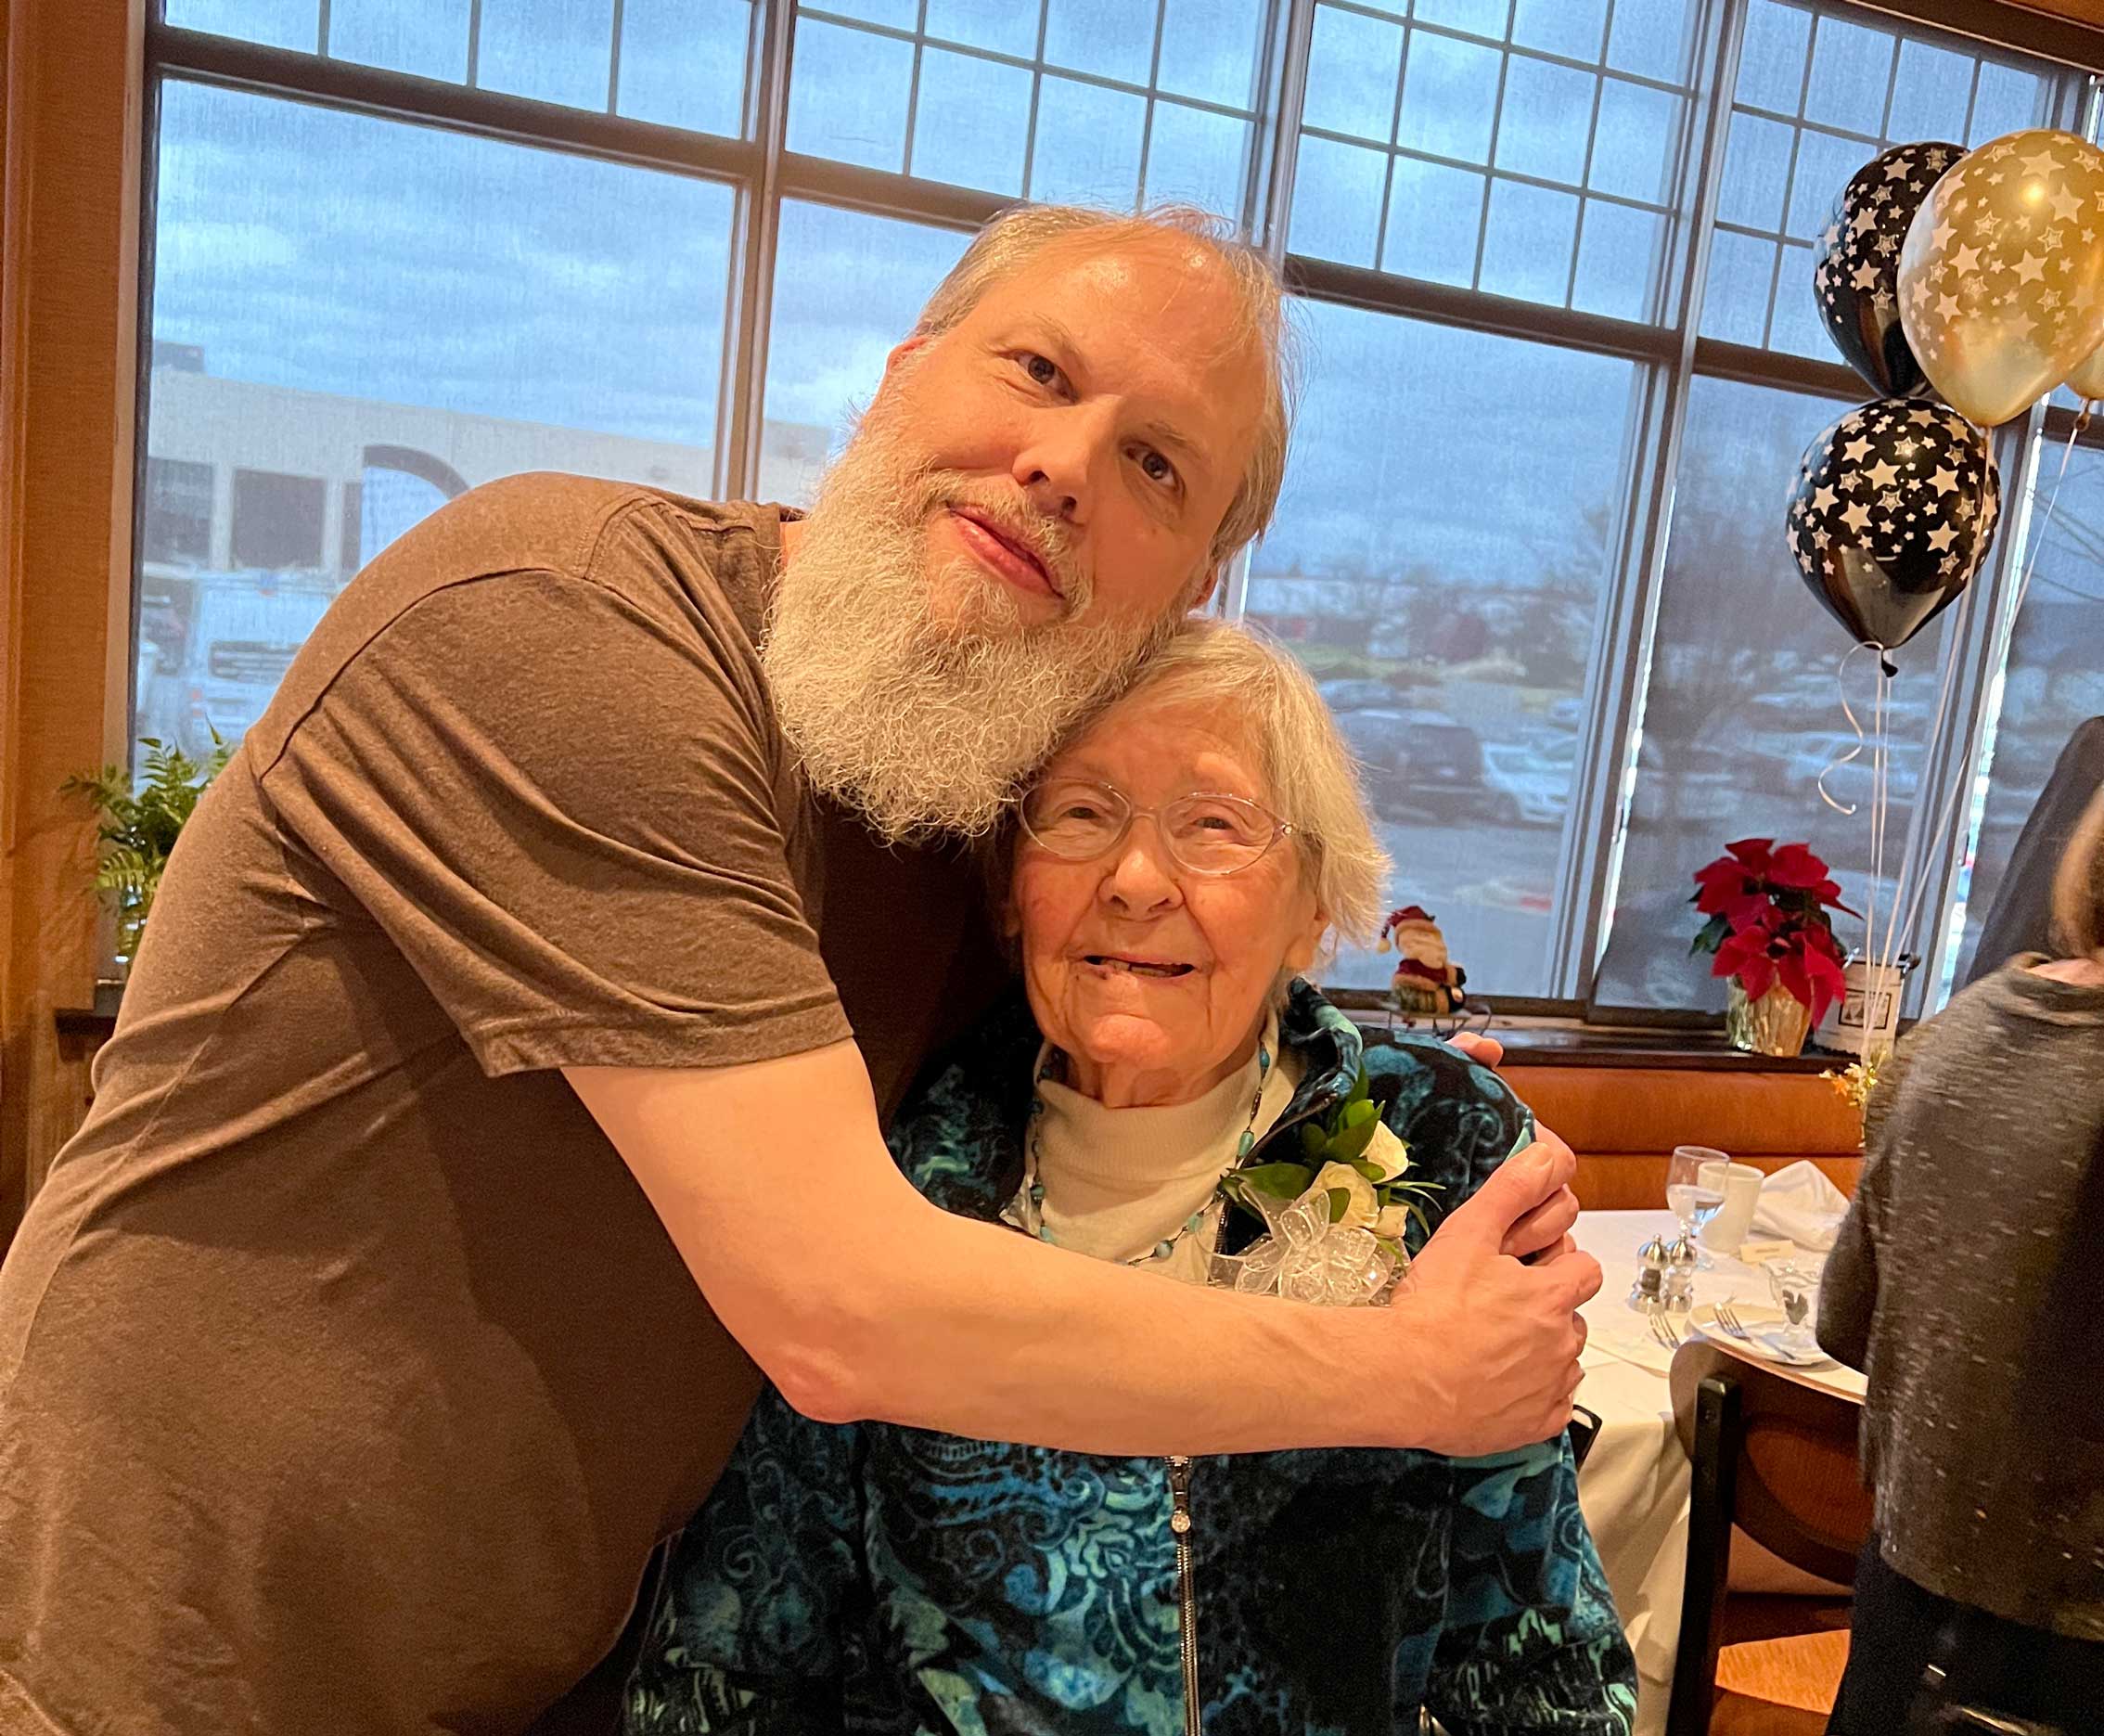 Scott Perry smiling and hugging is grandmother at a birthday party